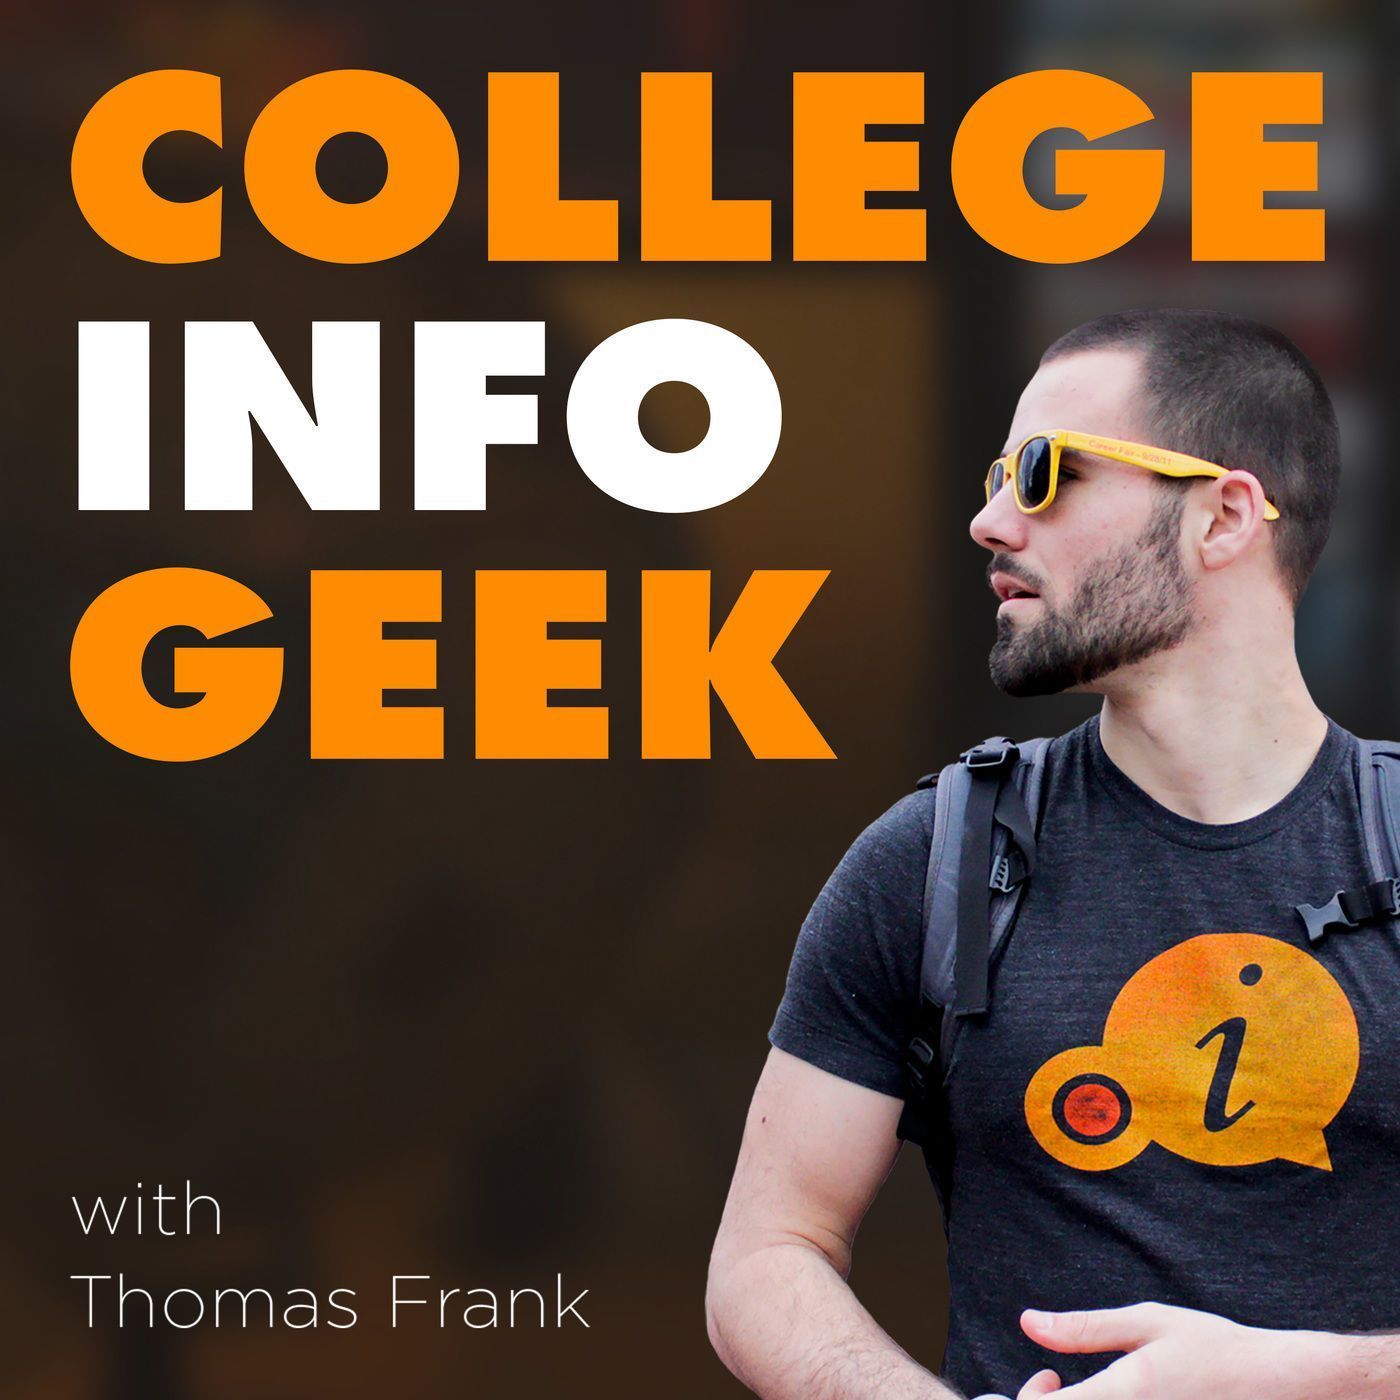 5 Questions: Making Studying Fun, Unlearning Bad Habits, & Honors Programs (Ep. 98)